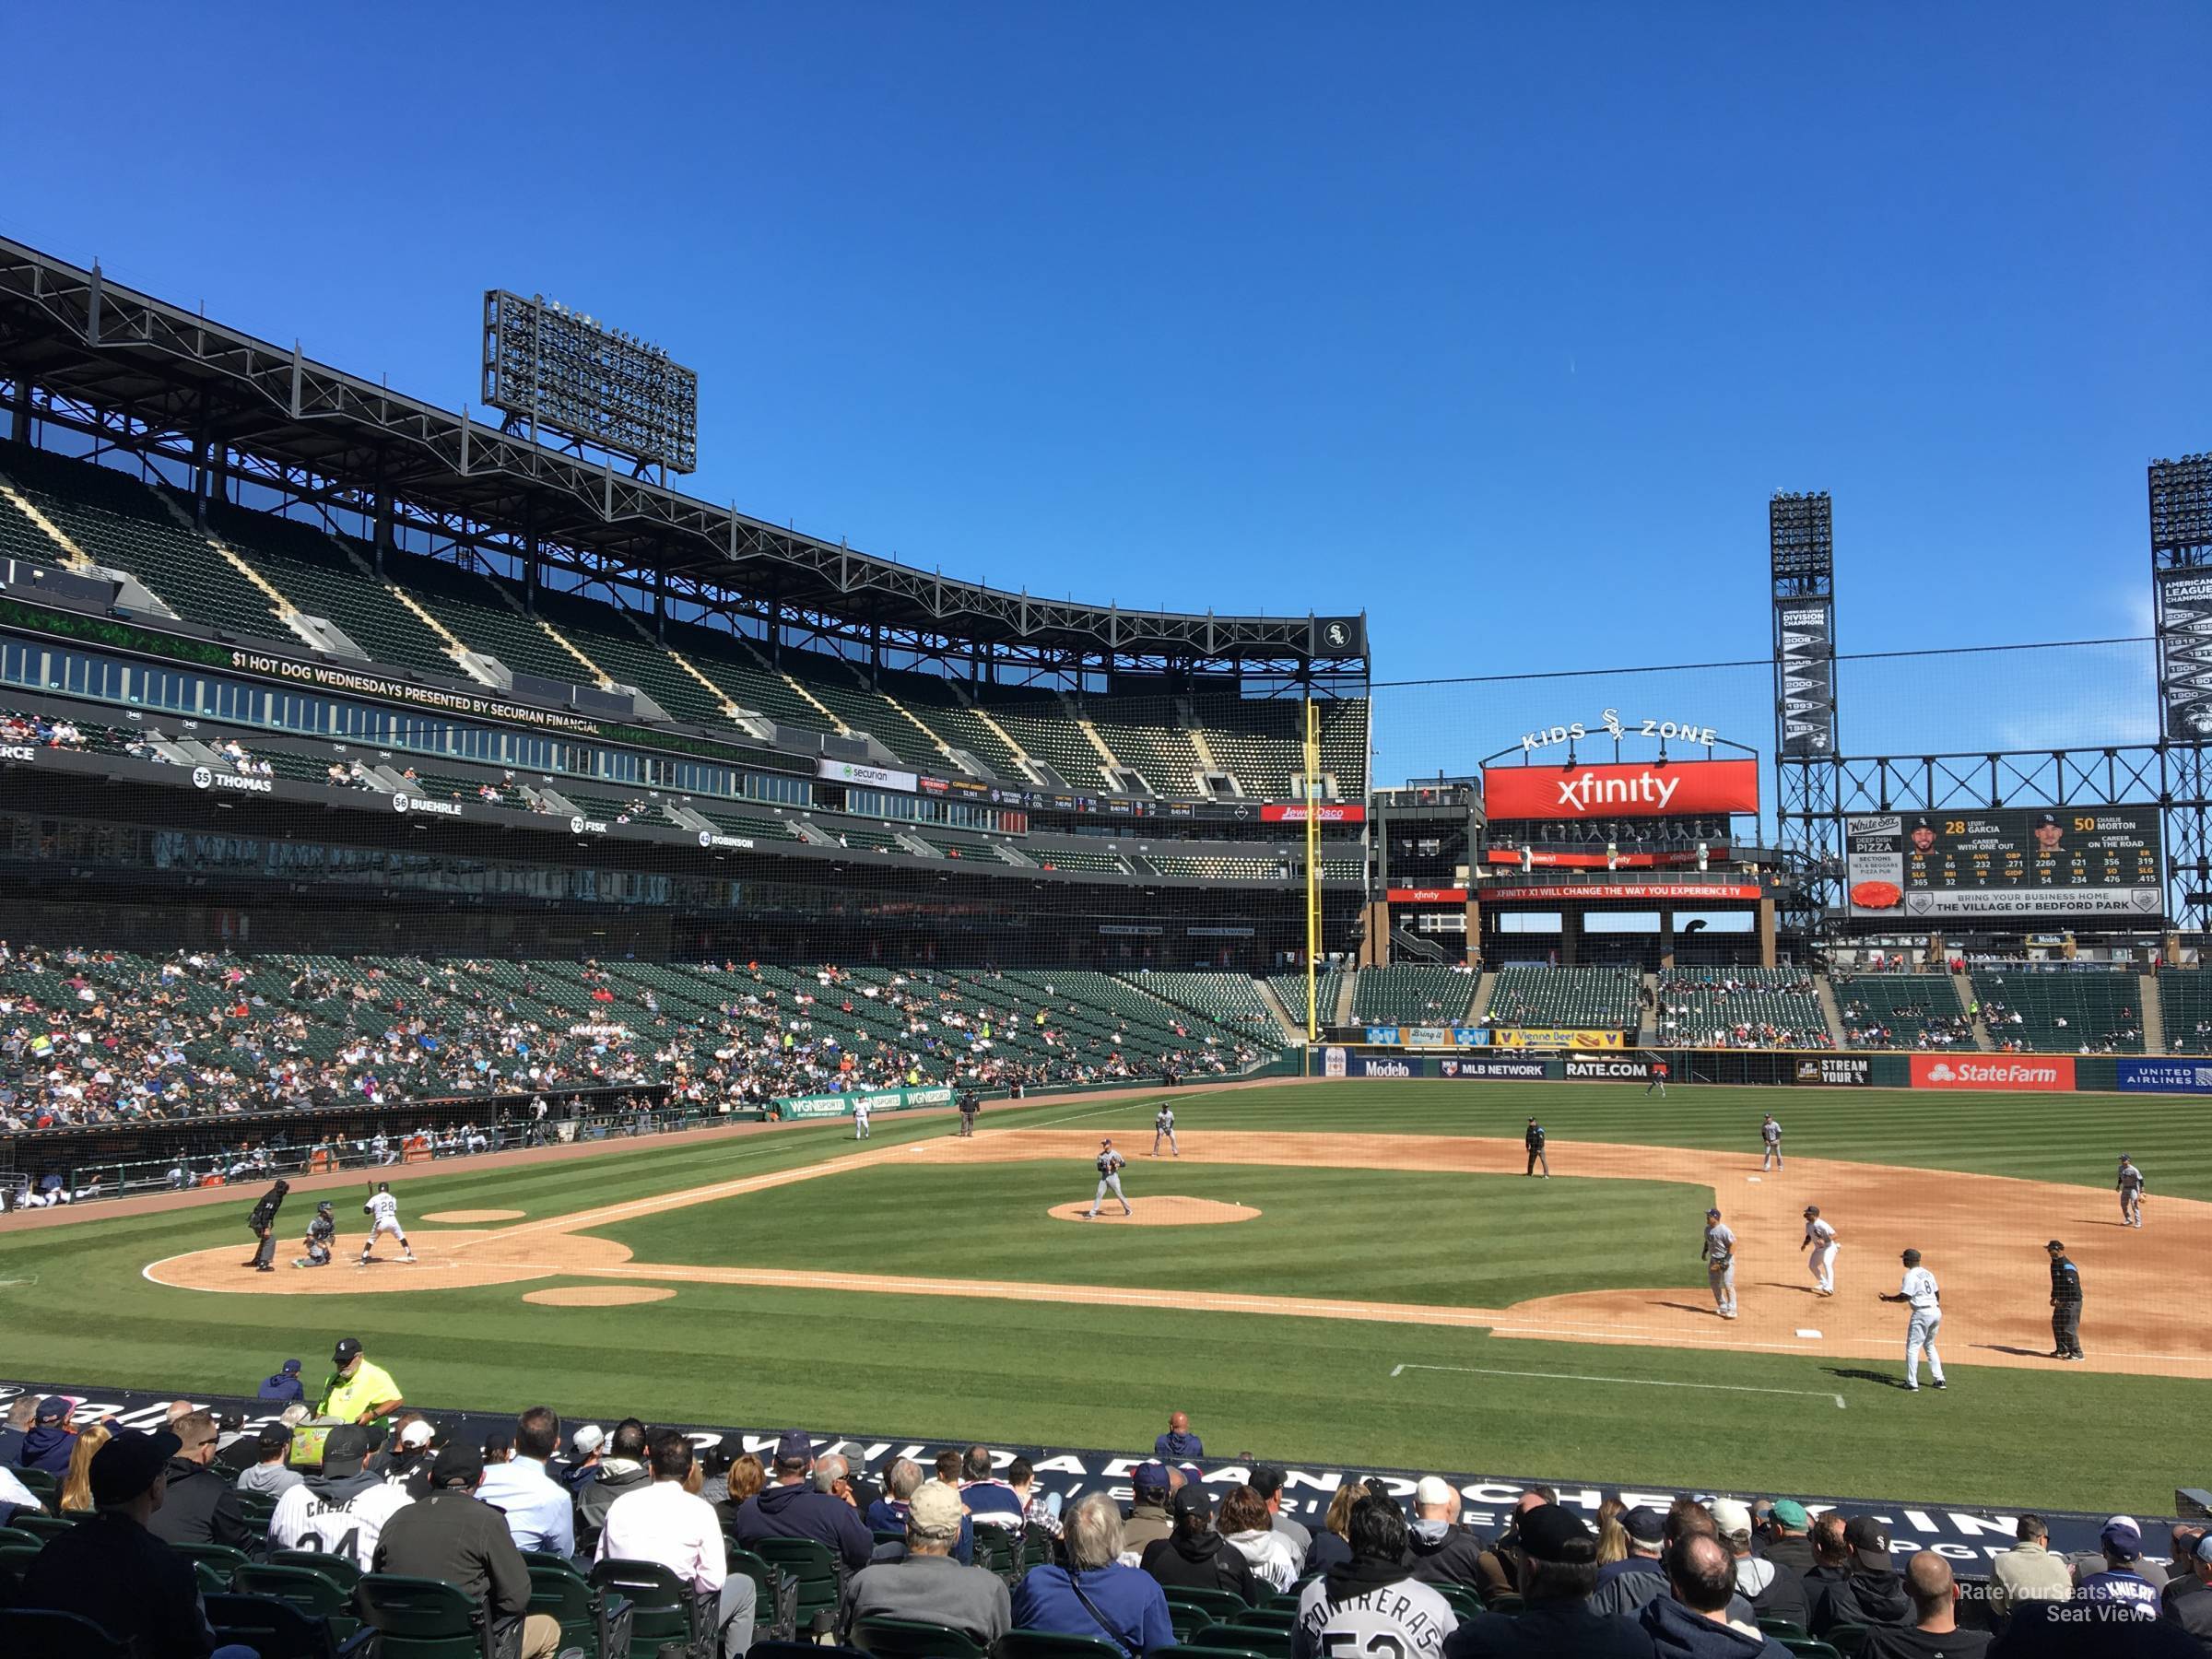 section 124, row 25 seat view  - guaranteed rate field